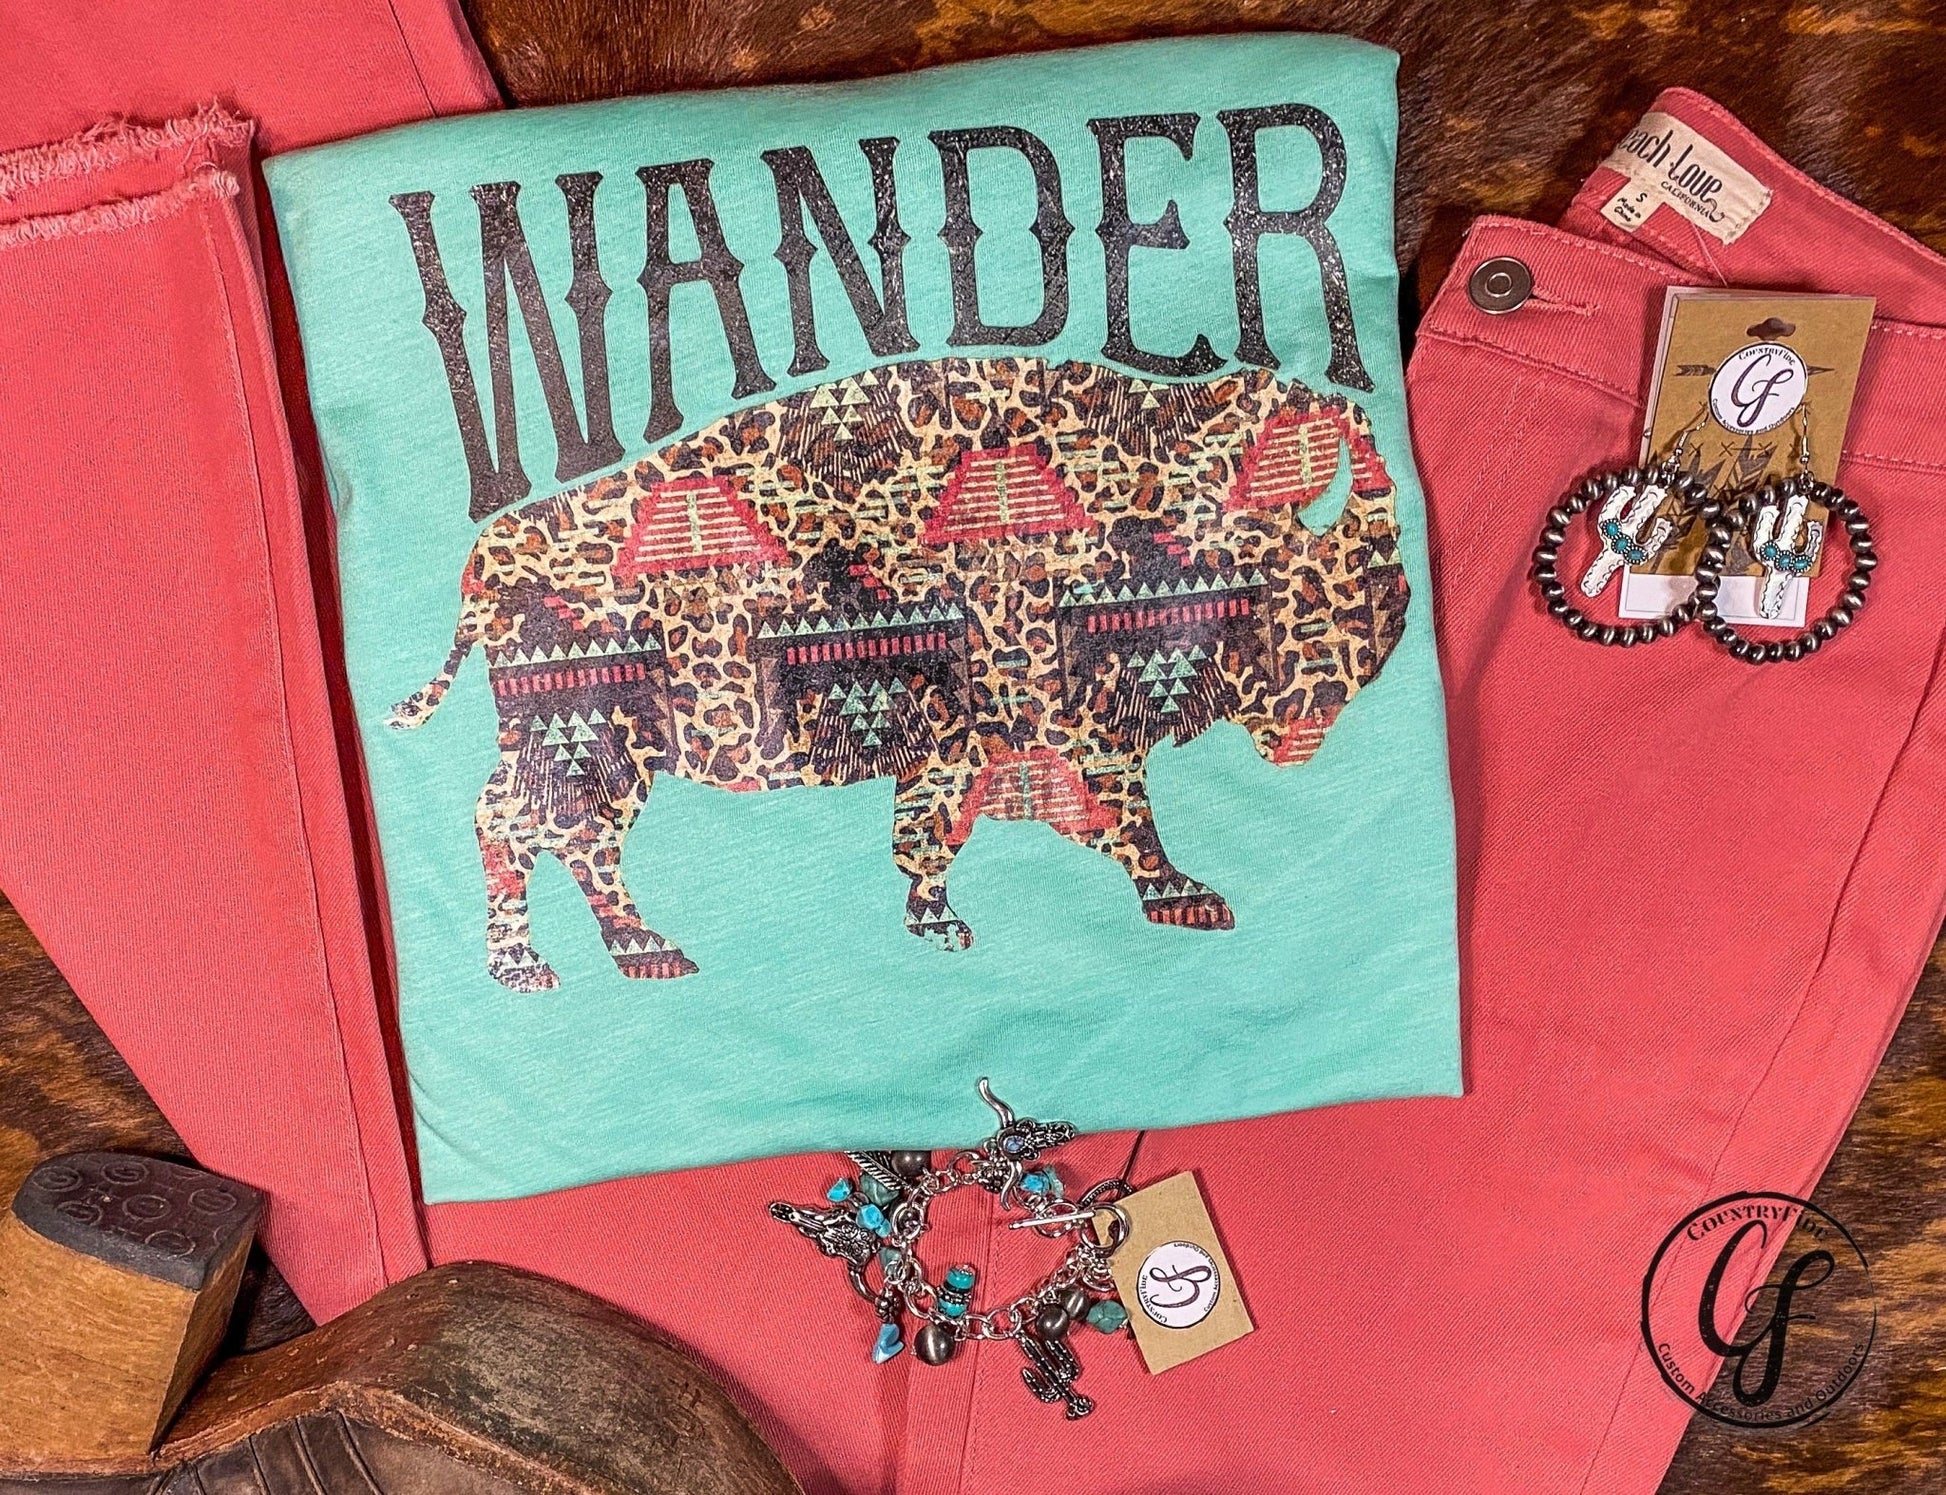 Wander - CountryFide Custom Accessories and Outdoors